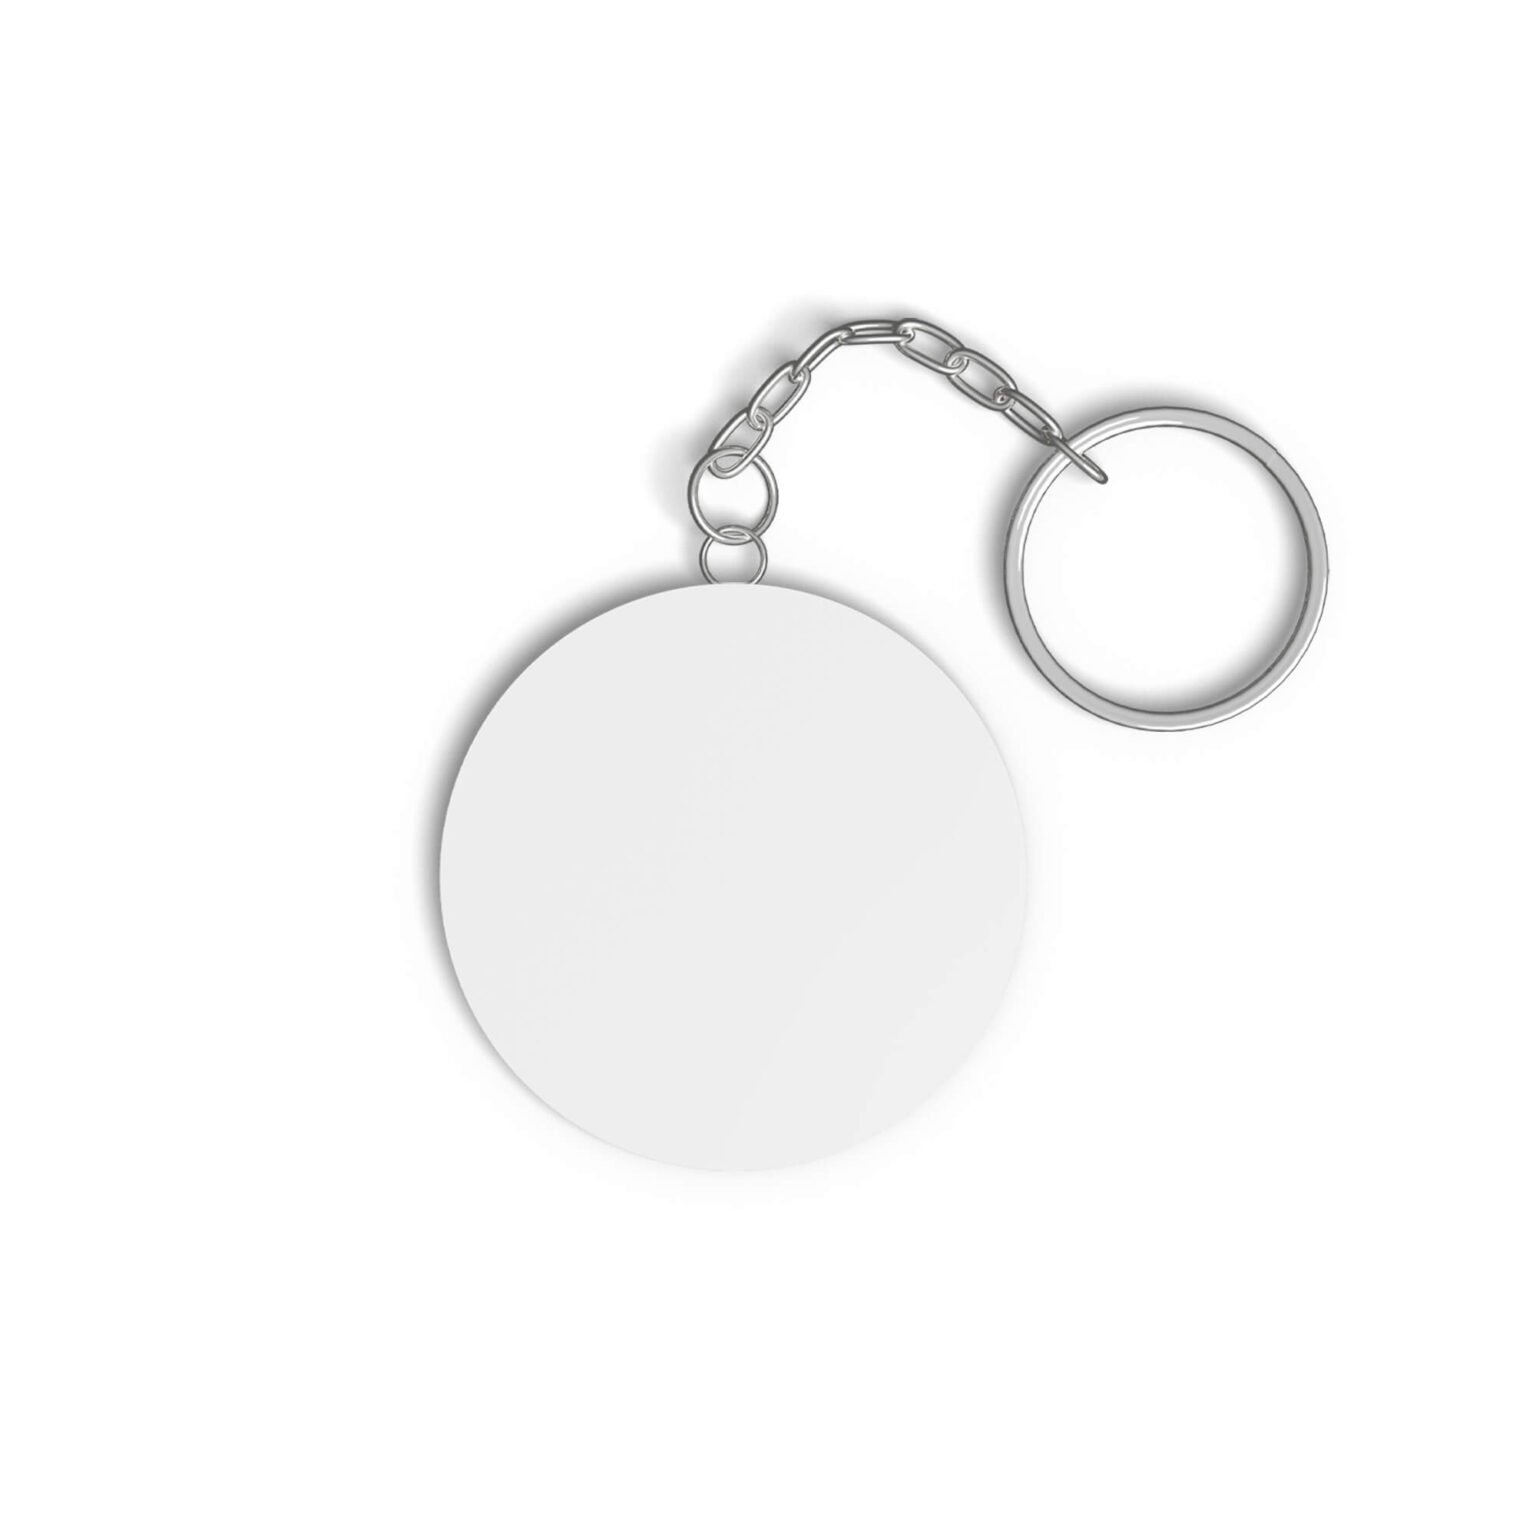 Download Free Round Keychain Mockup PSD Template - Mockup Den